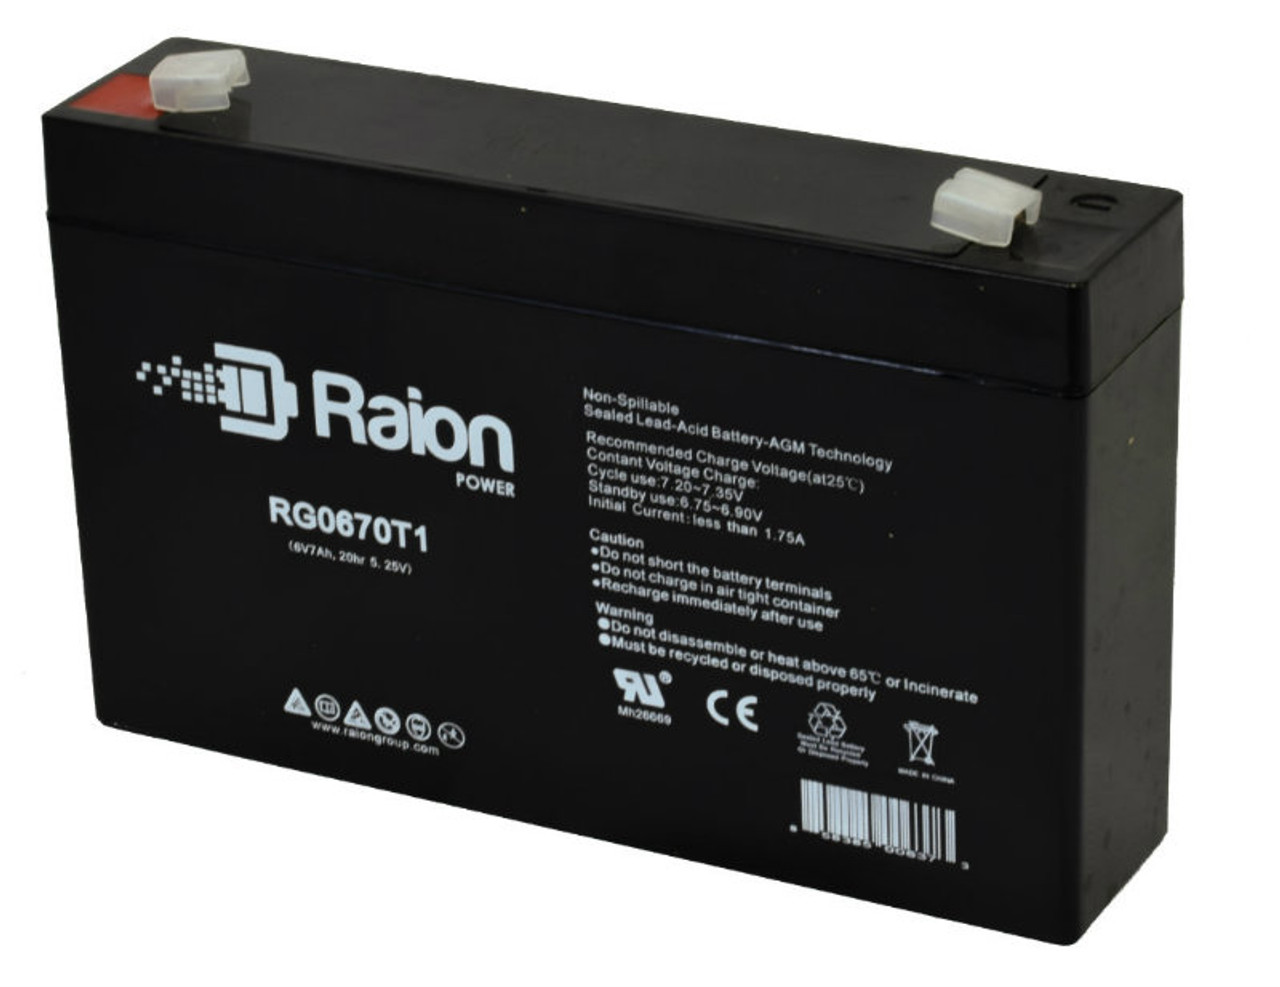 Raion Power 6V 7Ah Replacement Ride-On Toy Battery Cartridge for Best Choice Products SKY4750 Licensed Audi TT RS Ride-On - Black